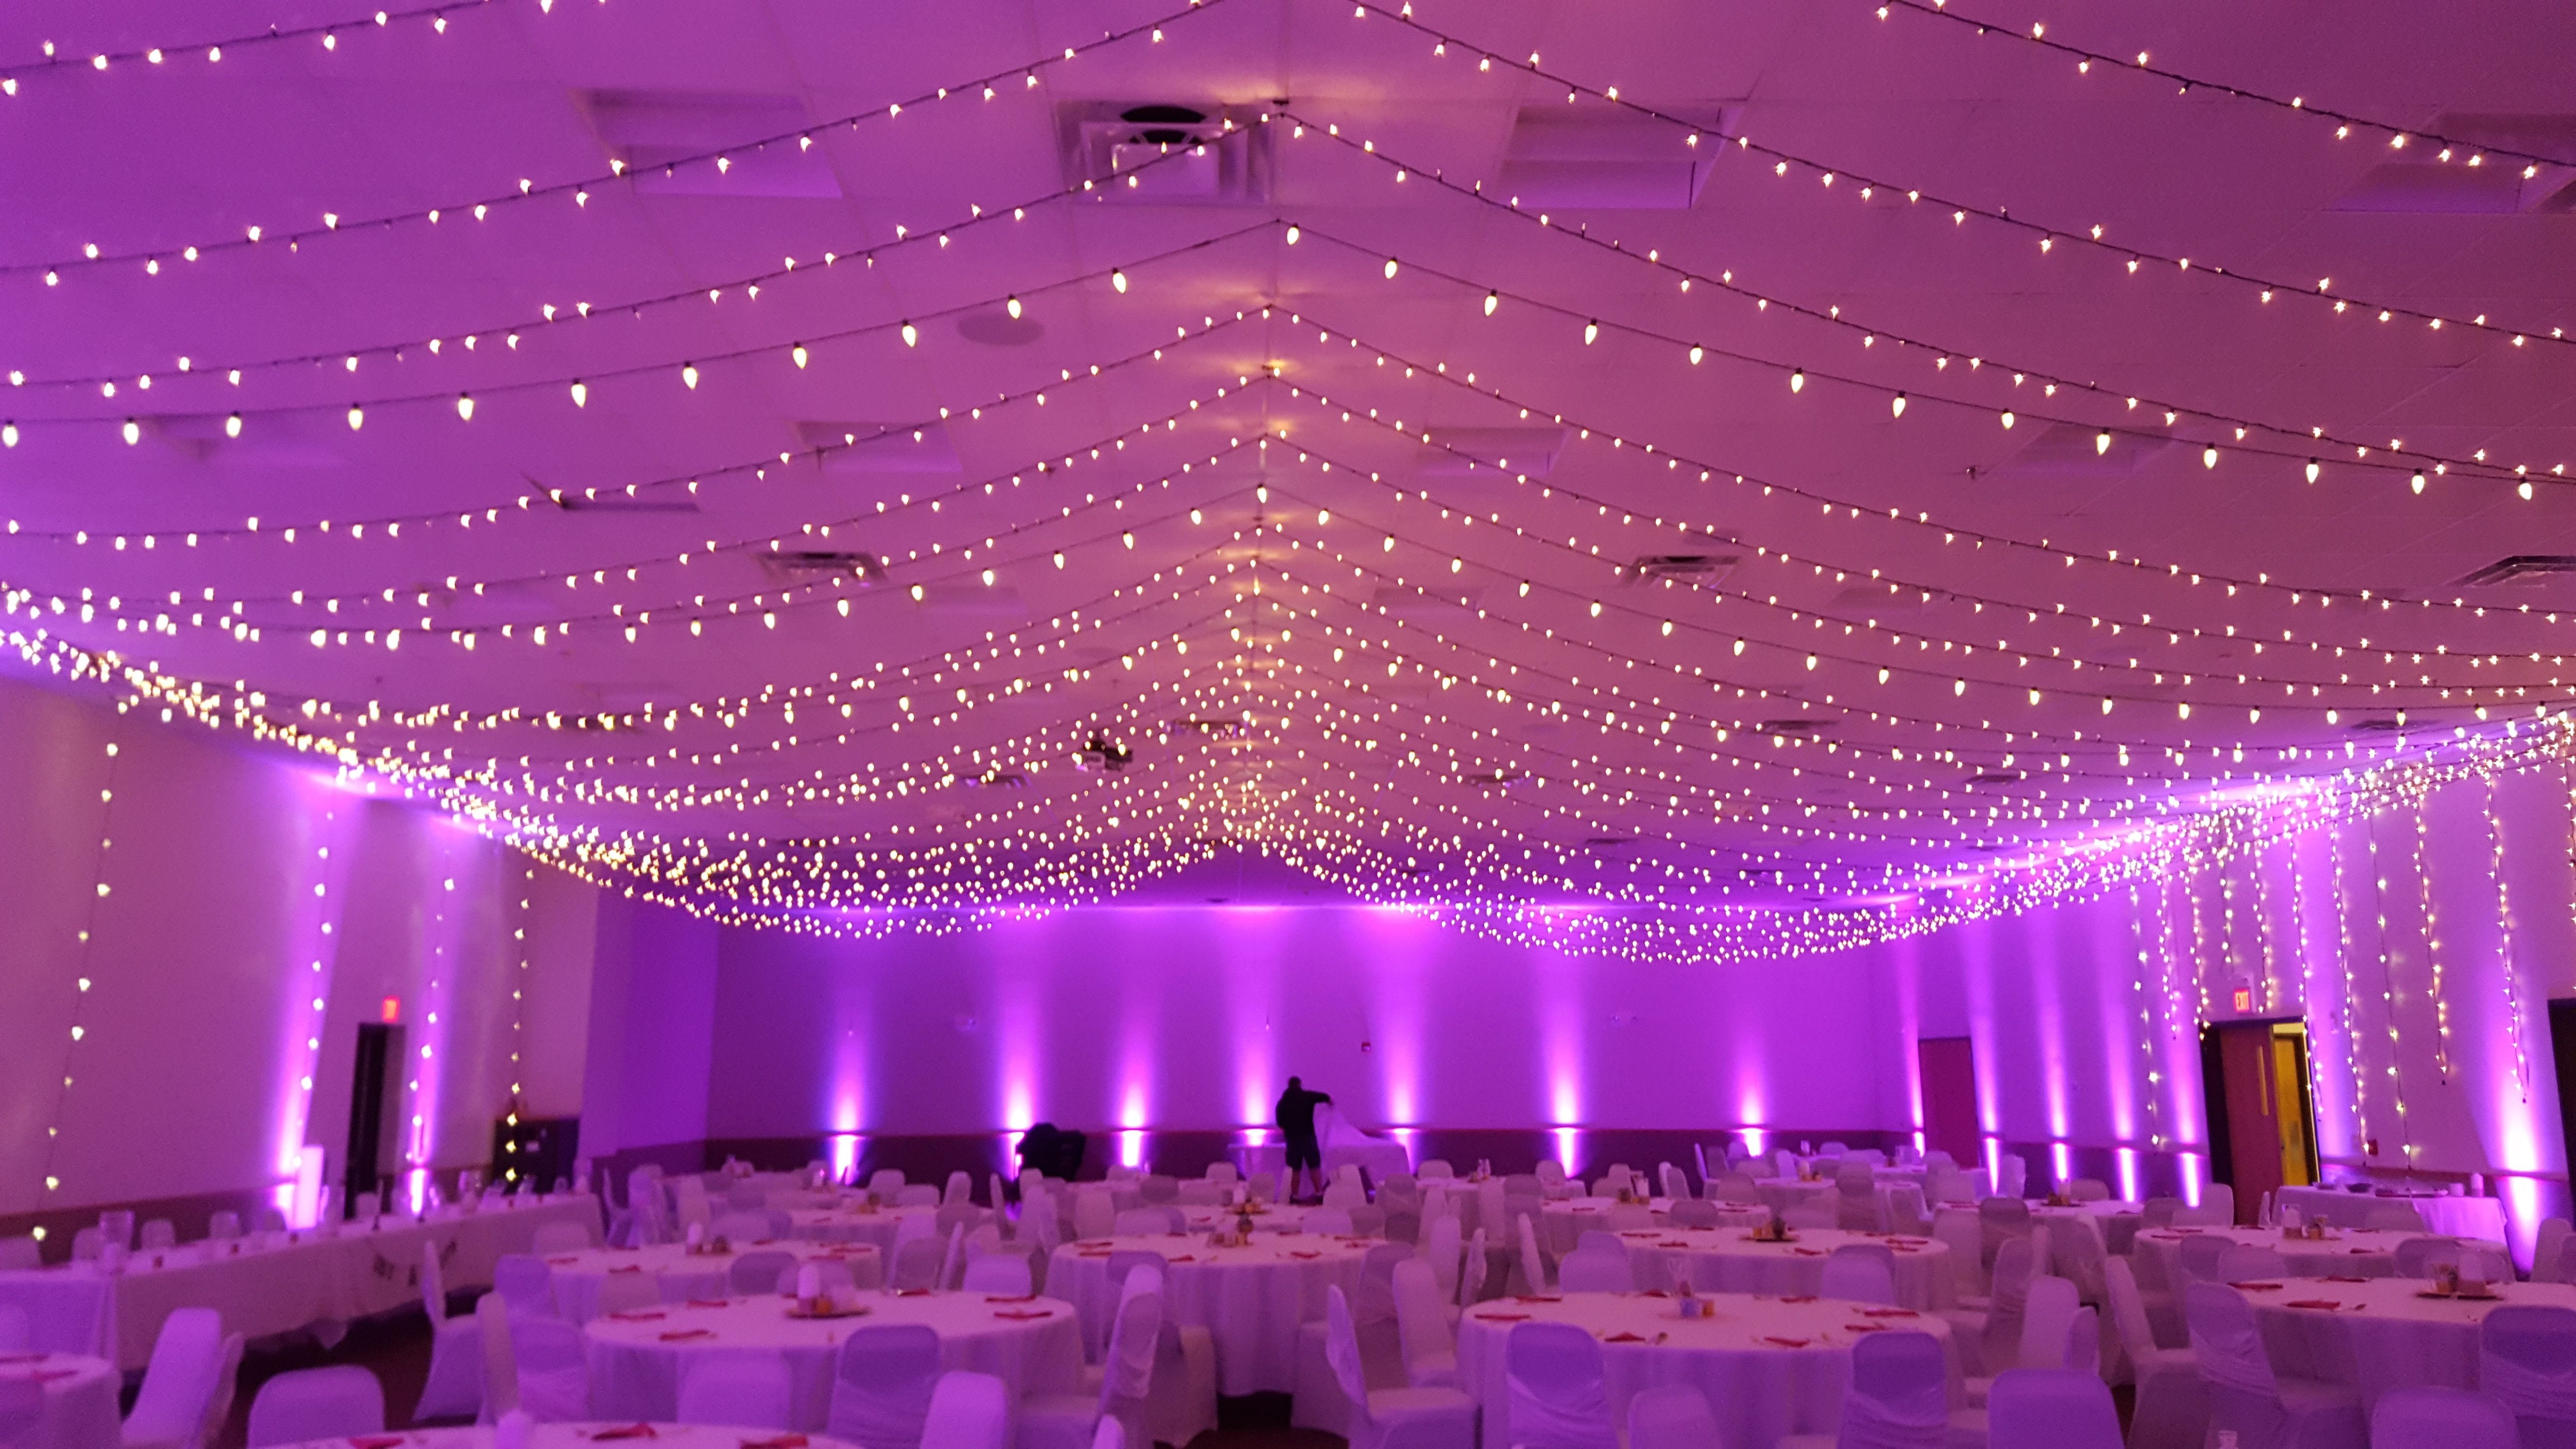 The AAD Shrine with a ceiling covered in bistro provided by Duluth Event Lighting.